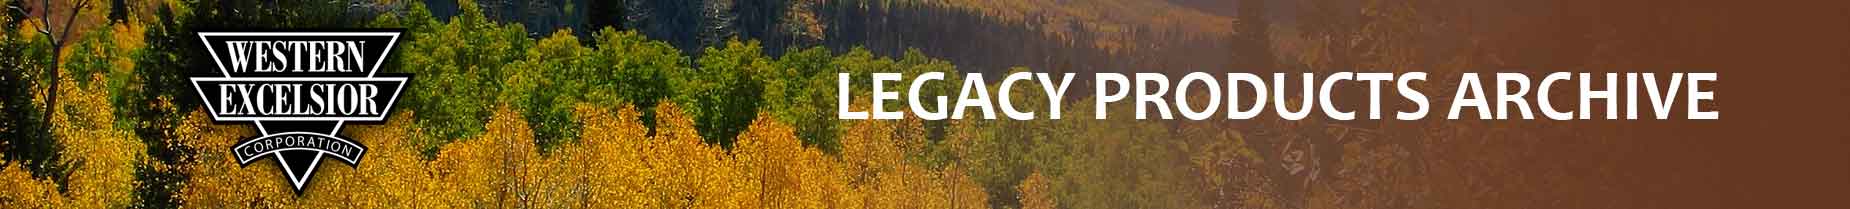 Legacy Products Archive